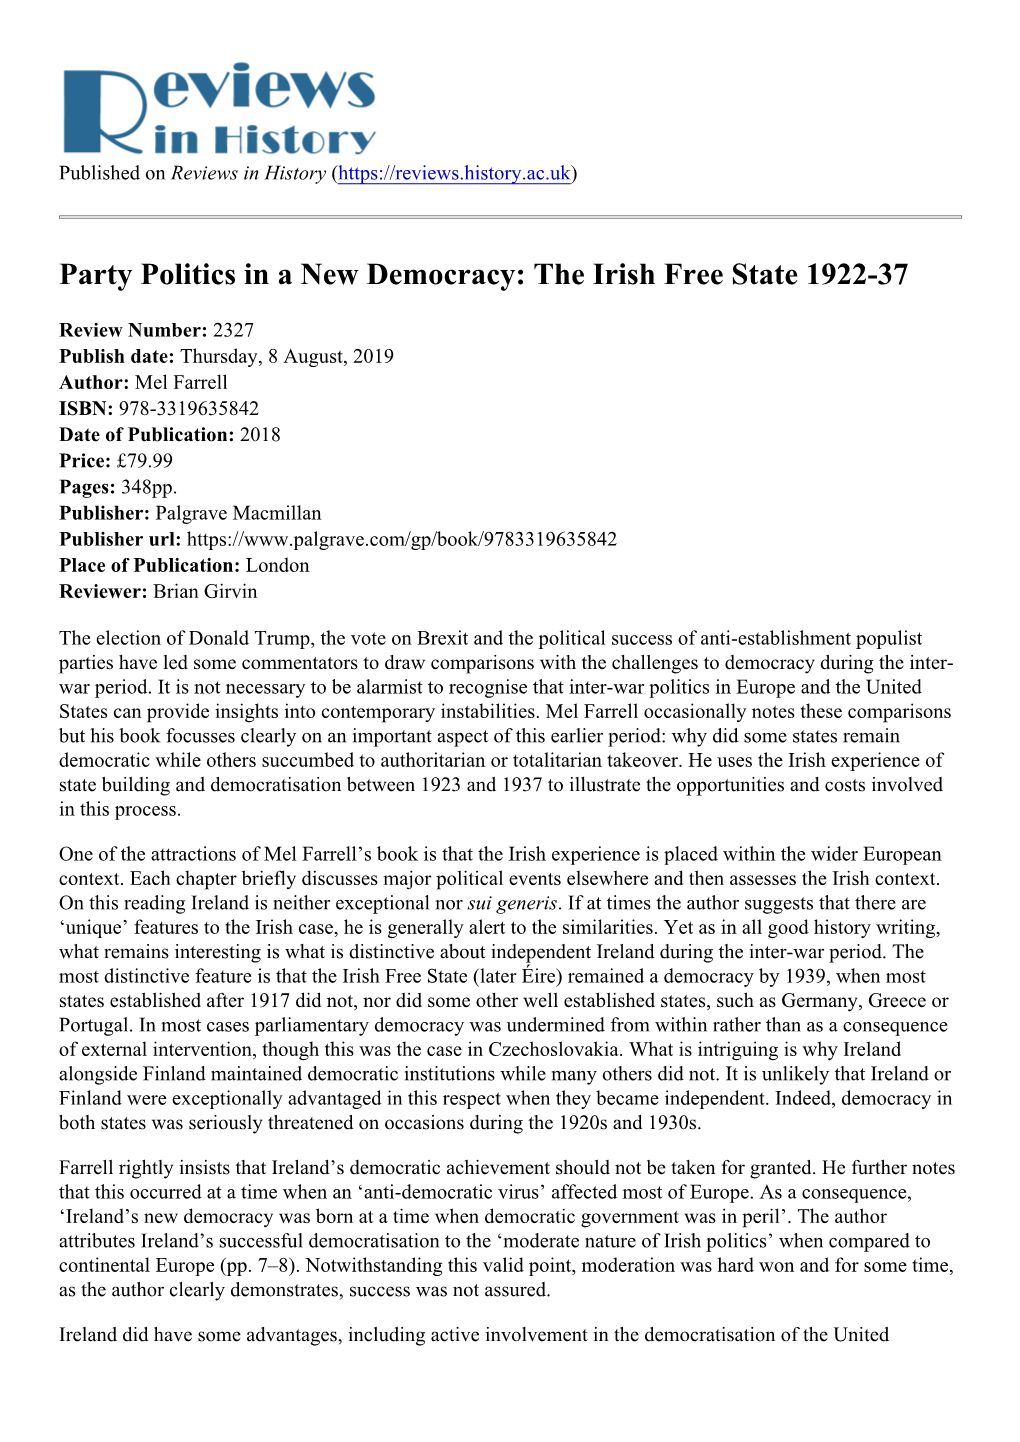 Party Politics in a New Democracy: the Irish Free State 1922-37